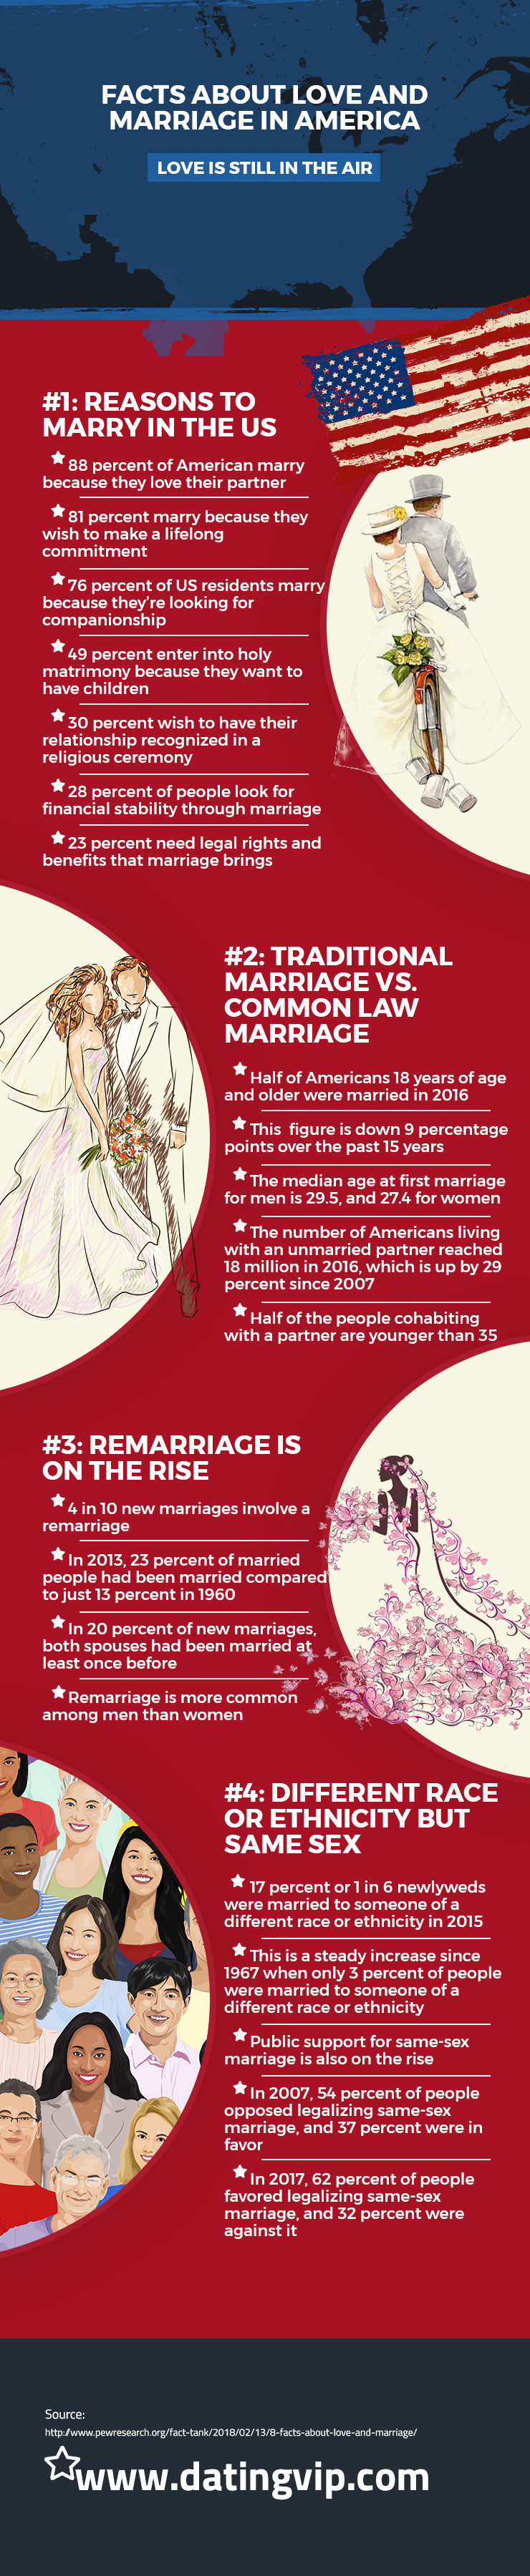 Facts about Love and Marriage in America